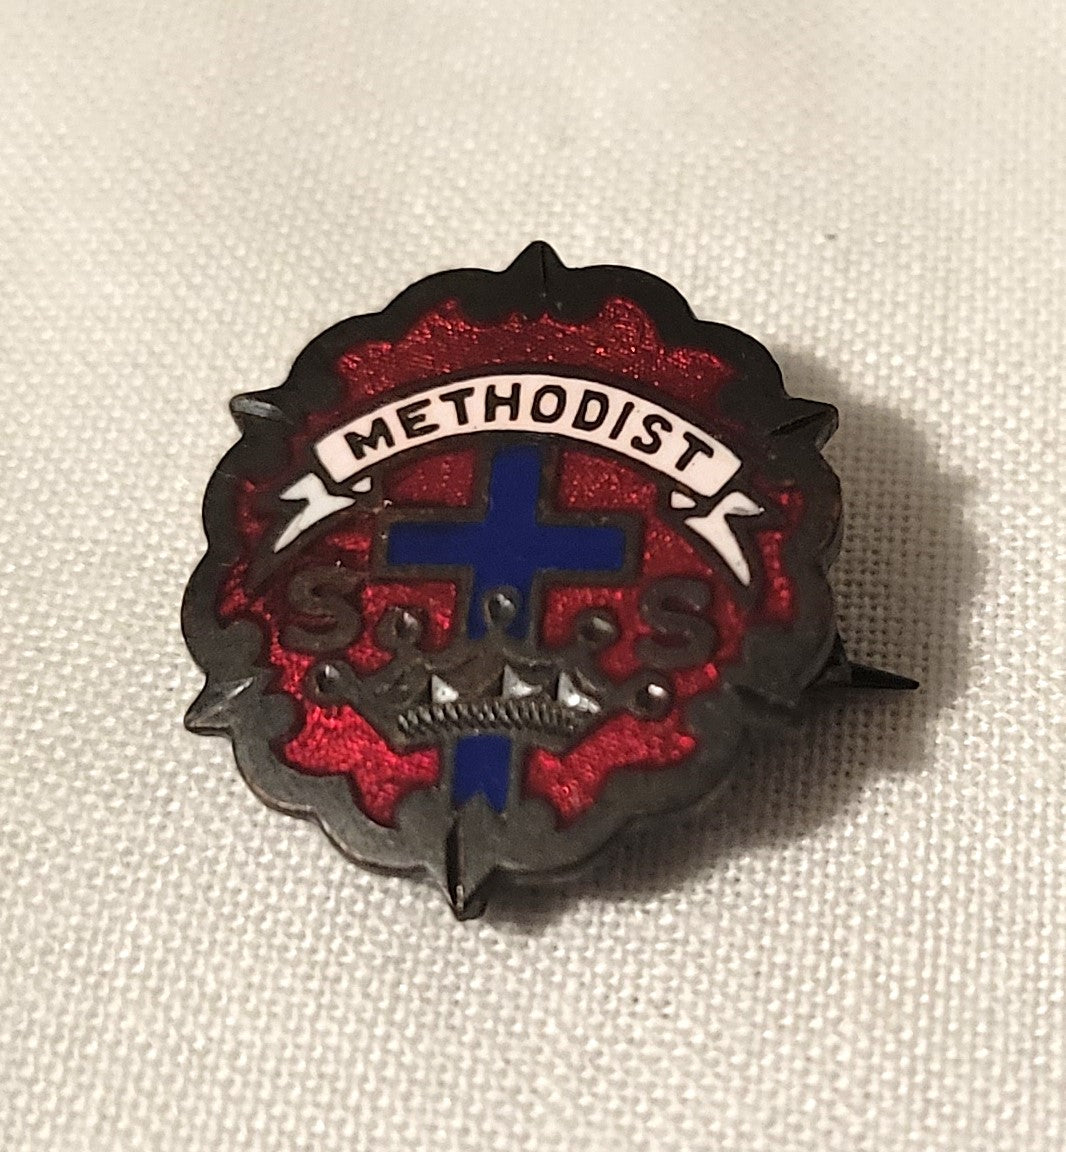 Vintage Methodist Sunday school pin with red and blue inlays. Front view.